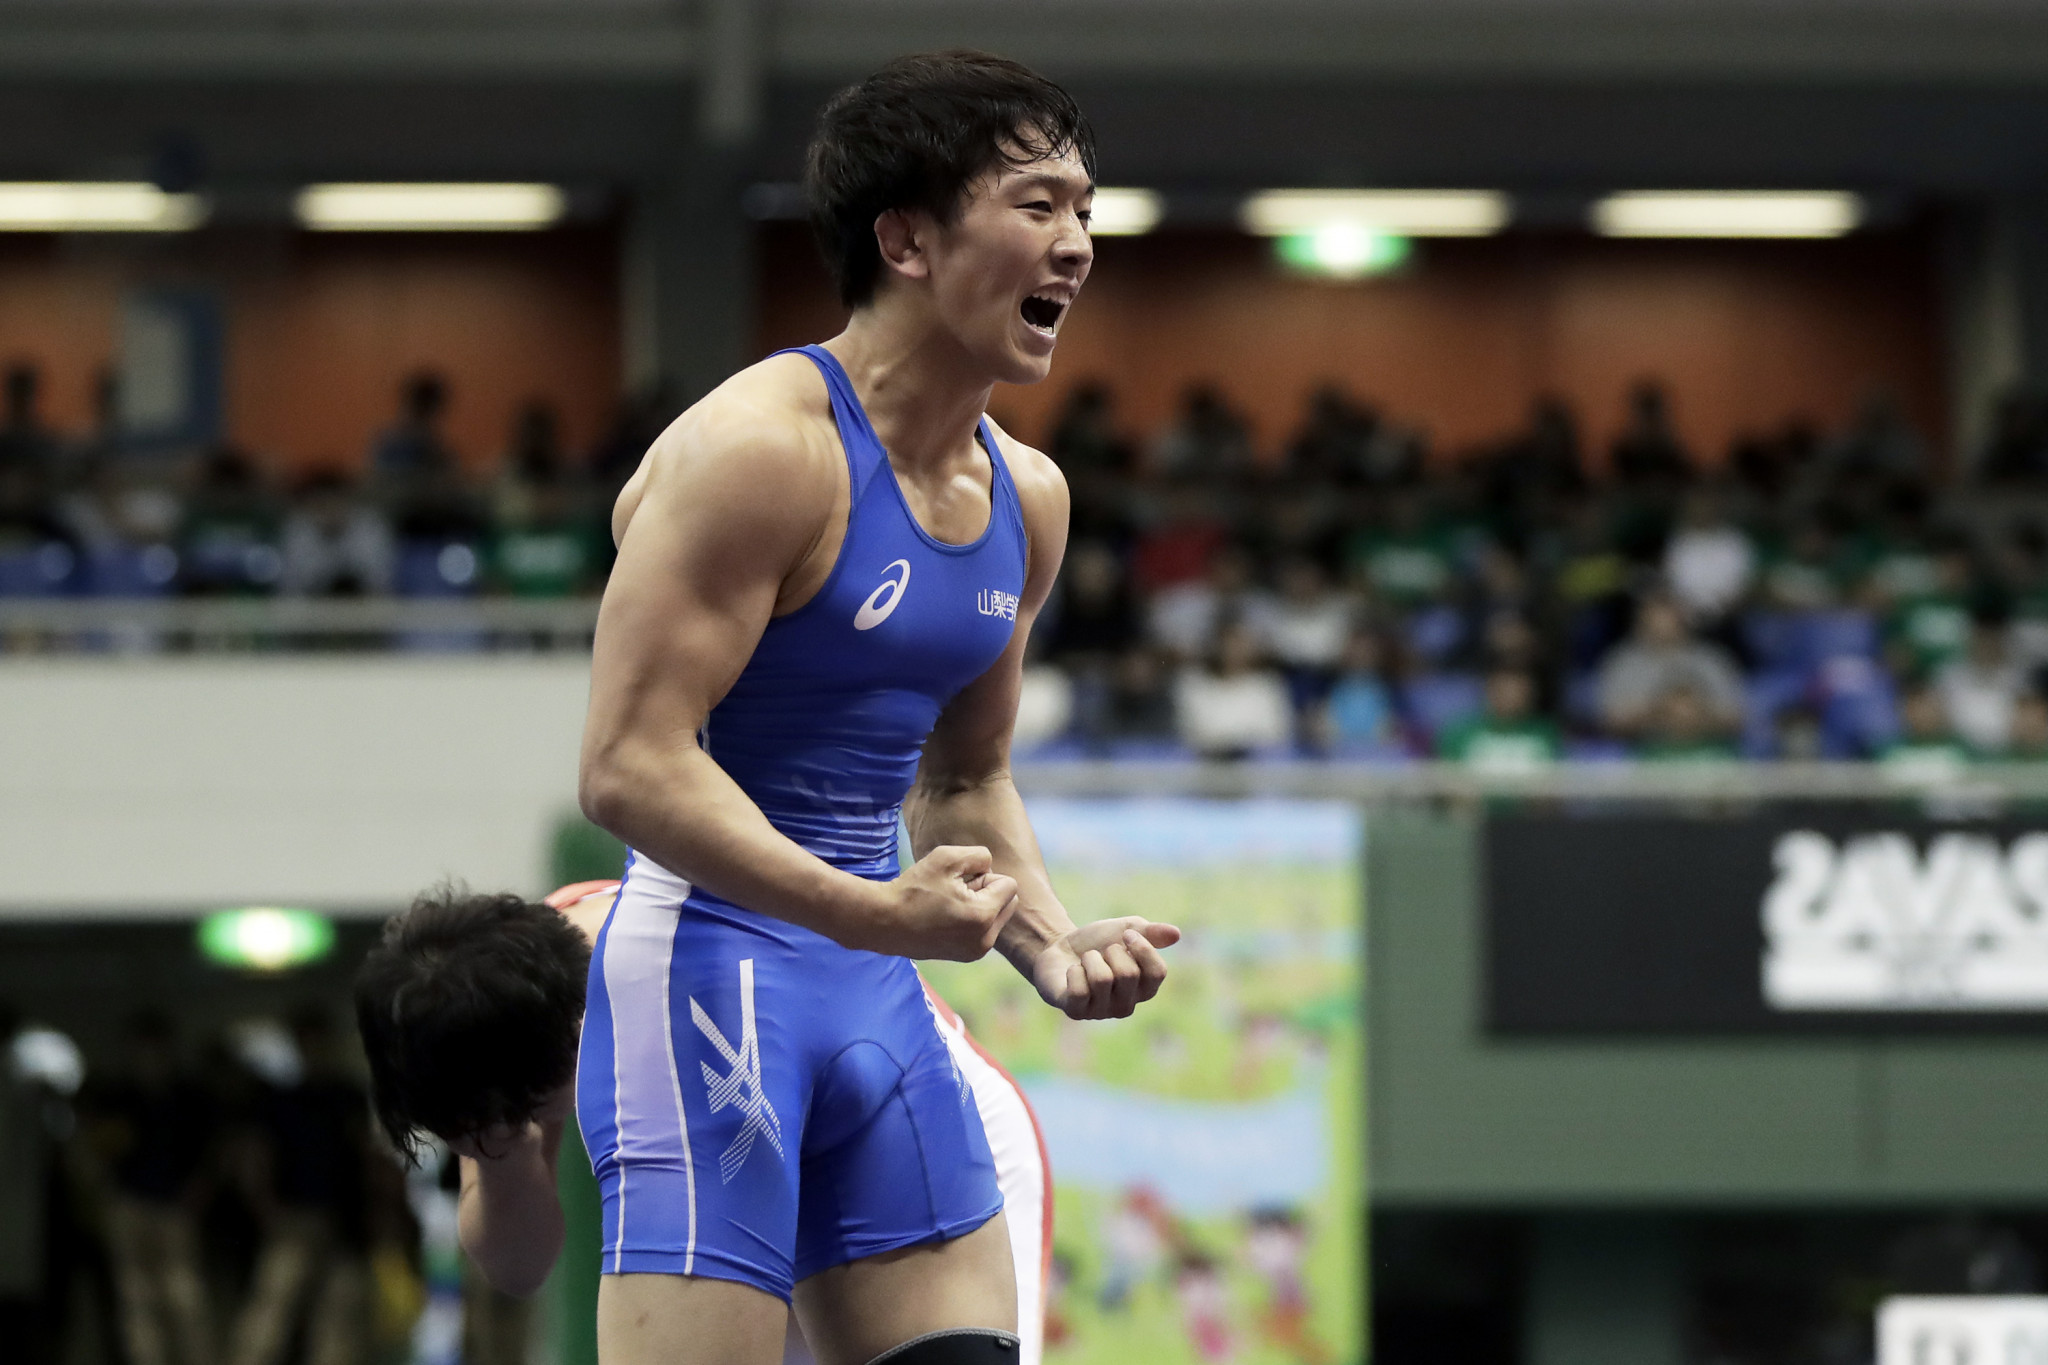 Takuto Otoguro triumphed in the men's 65kg freestyle event ©Getty Images